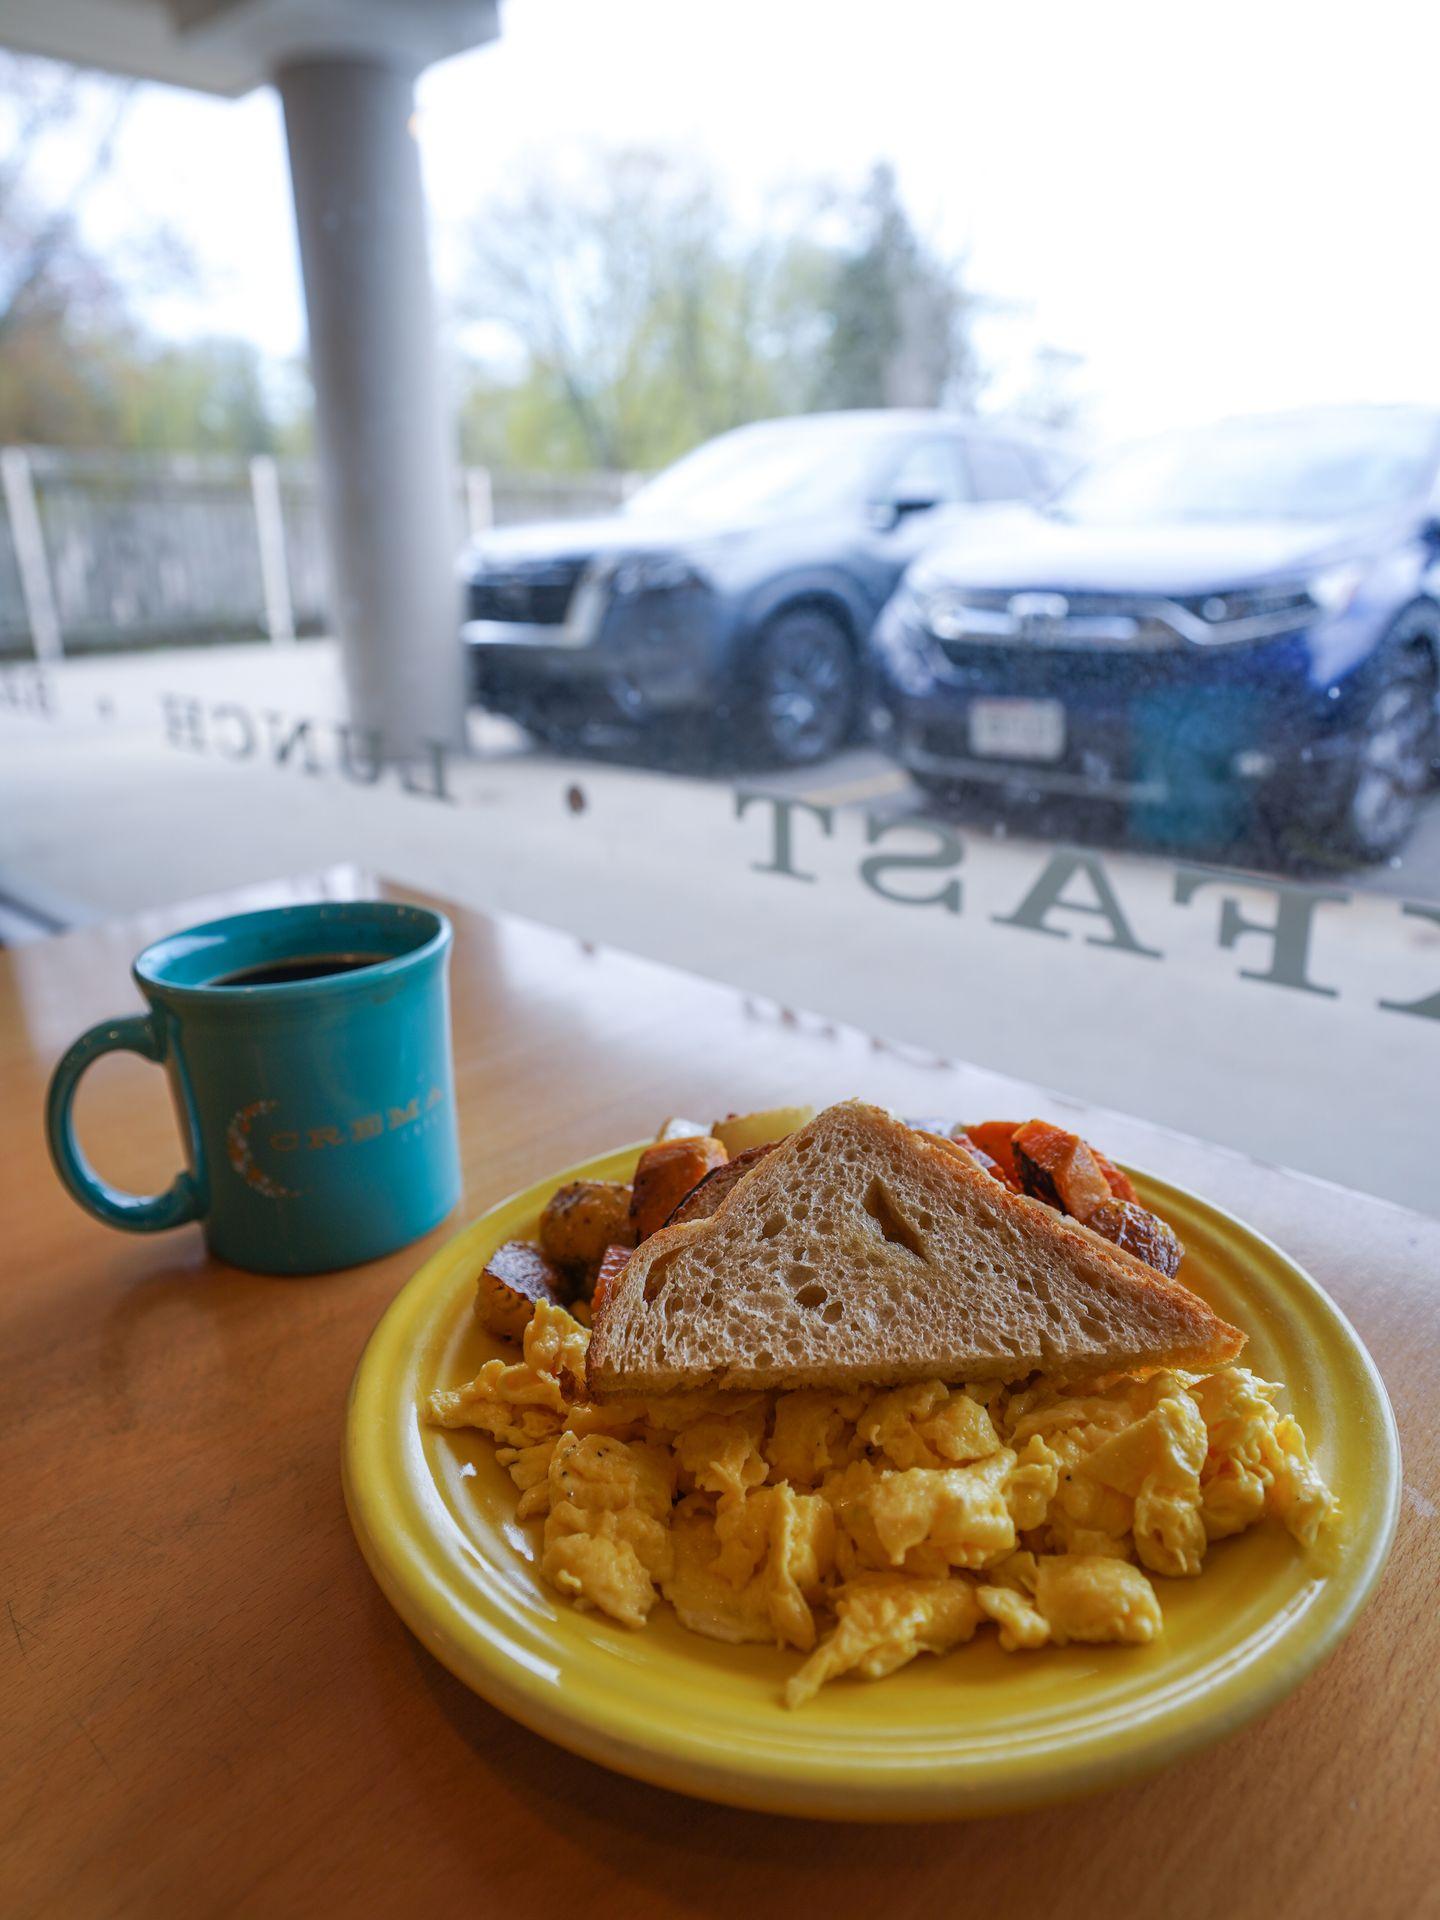 A yellow plate with scrambled eggs, toast and sweet potato has. In the background, there is a window and a blue mug with coffee.